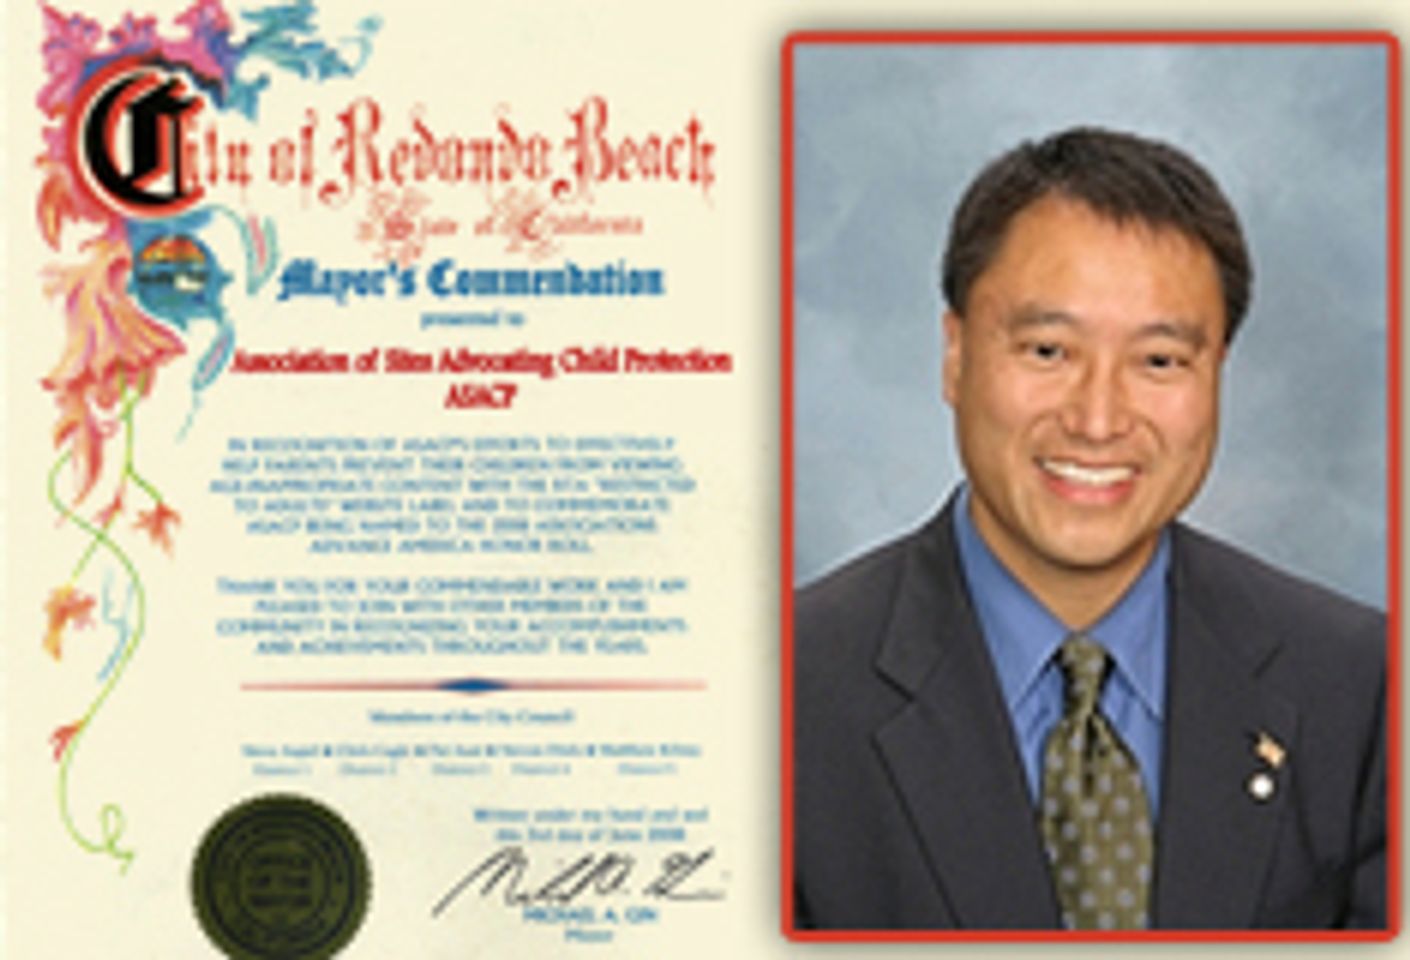 ASACP Commended by Redondo Beach Mayor